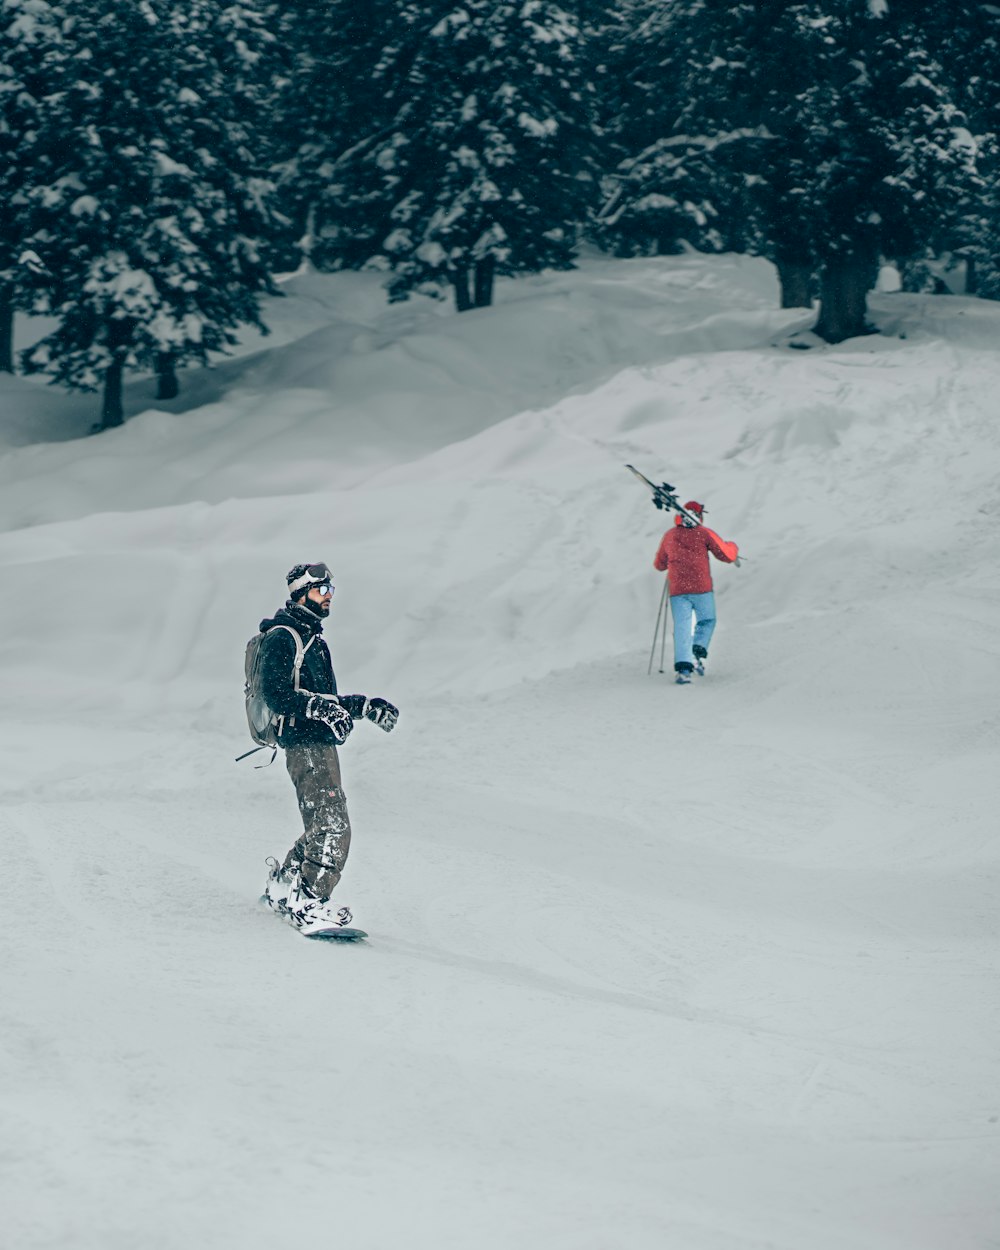 Man in blue and white ice hockey jersey and blue pants riding on ski blades  photo – Free Grey Image on Unsplash